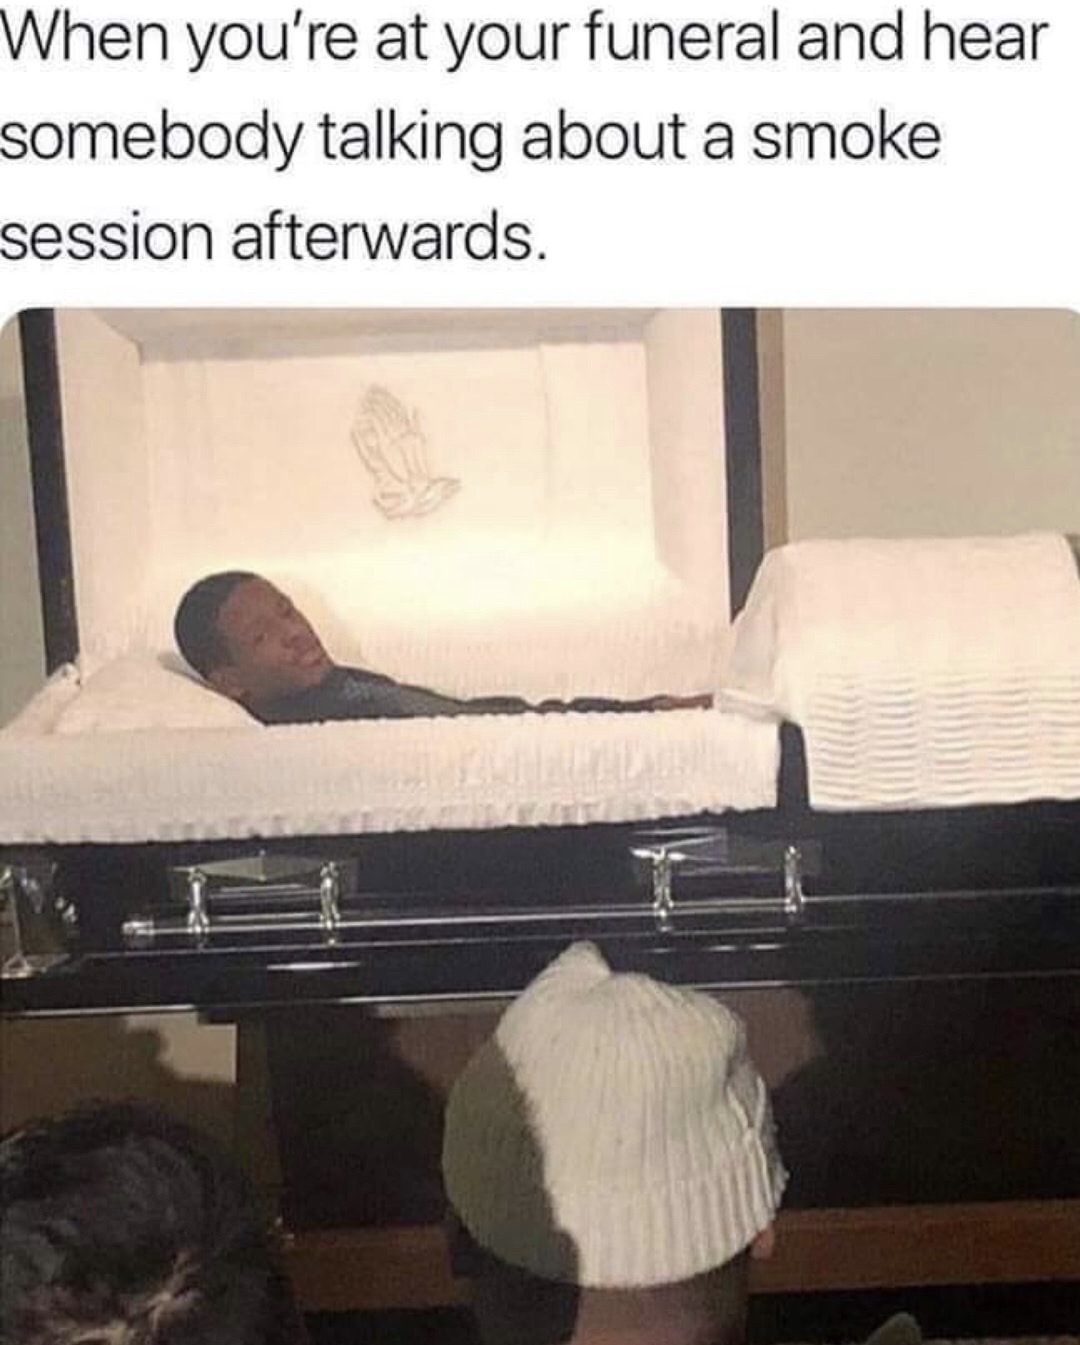 lifeafter memes - When you're at your funeral and hear somebody talking about a smoke session afterwards.